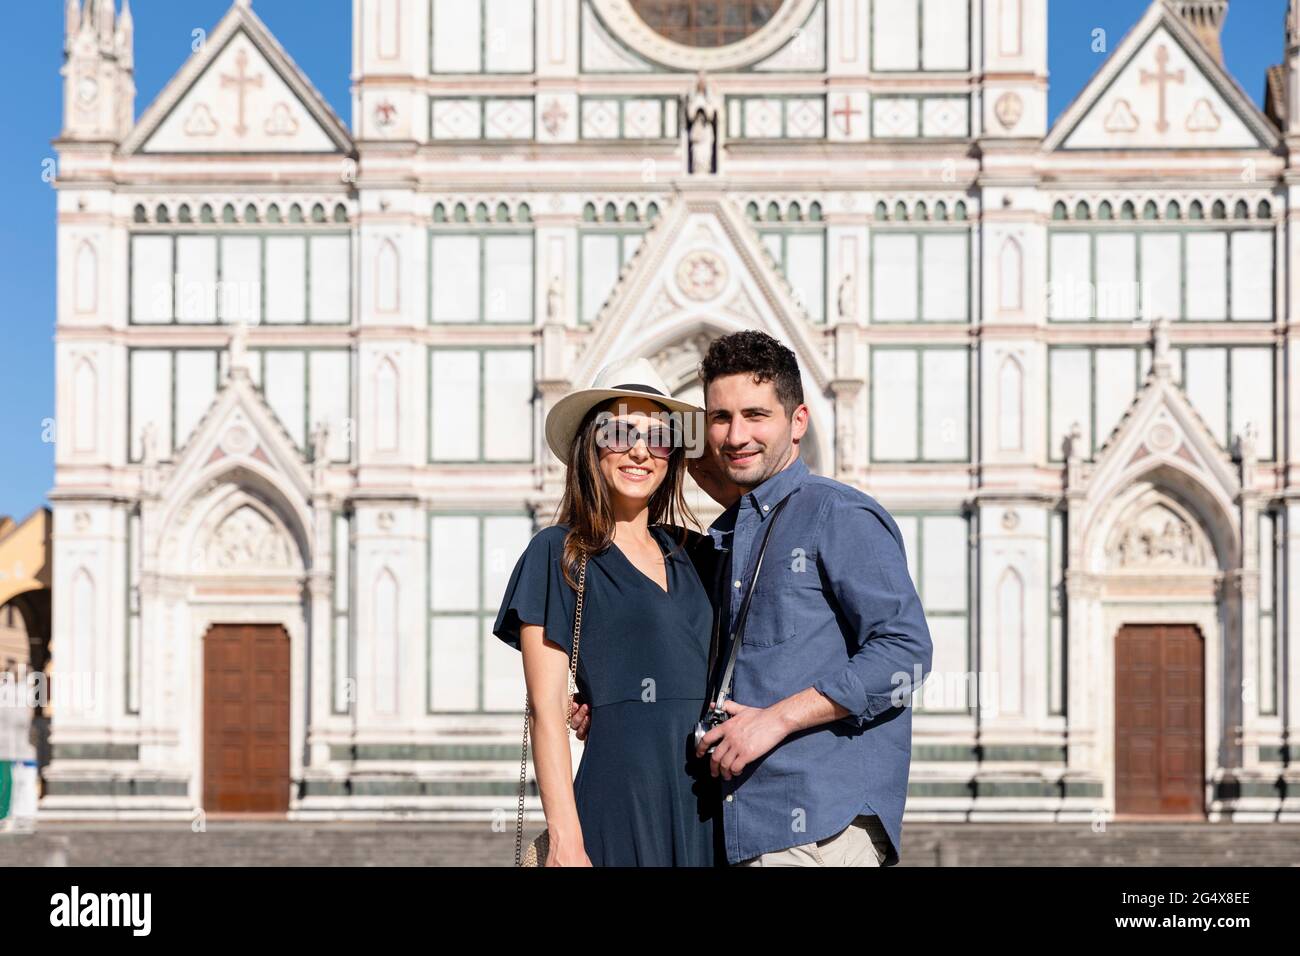 Smiling tourist couple standing in front of Basilica Of Santa Croce, Florence, Italy Stock Photo